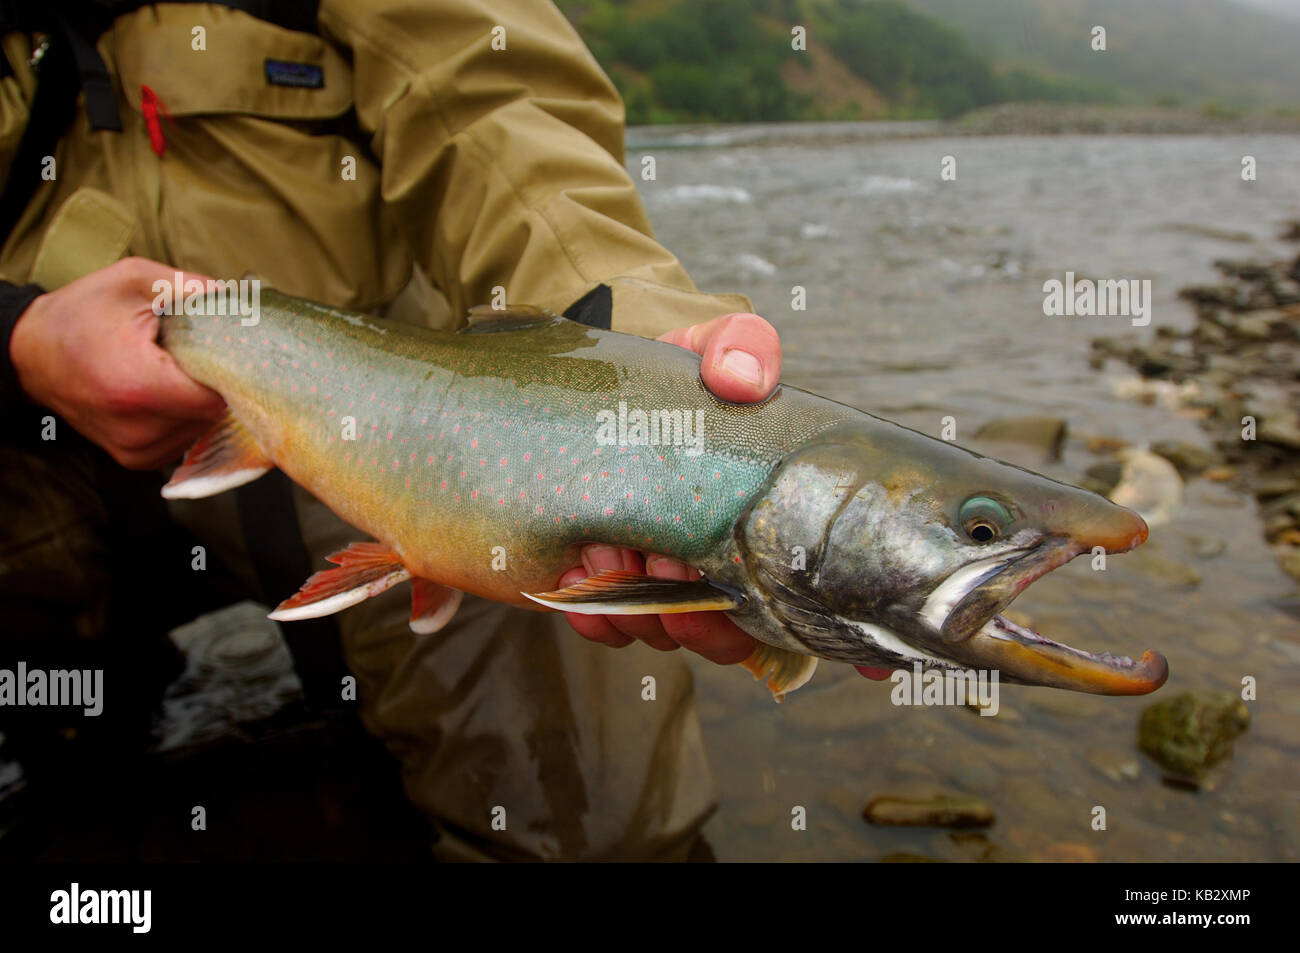 Fisherman holding an Arctic Char or Dolly Varden caught while fly fishing near Chignik Alaska Stock Photo